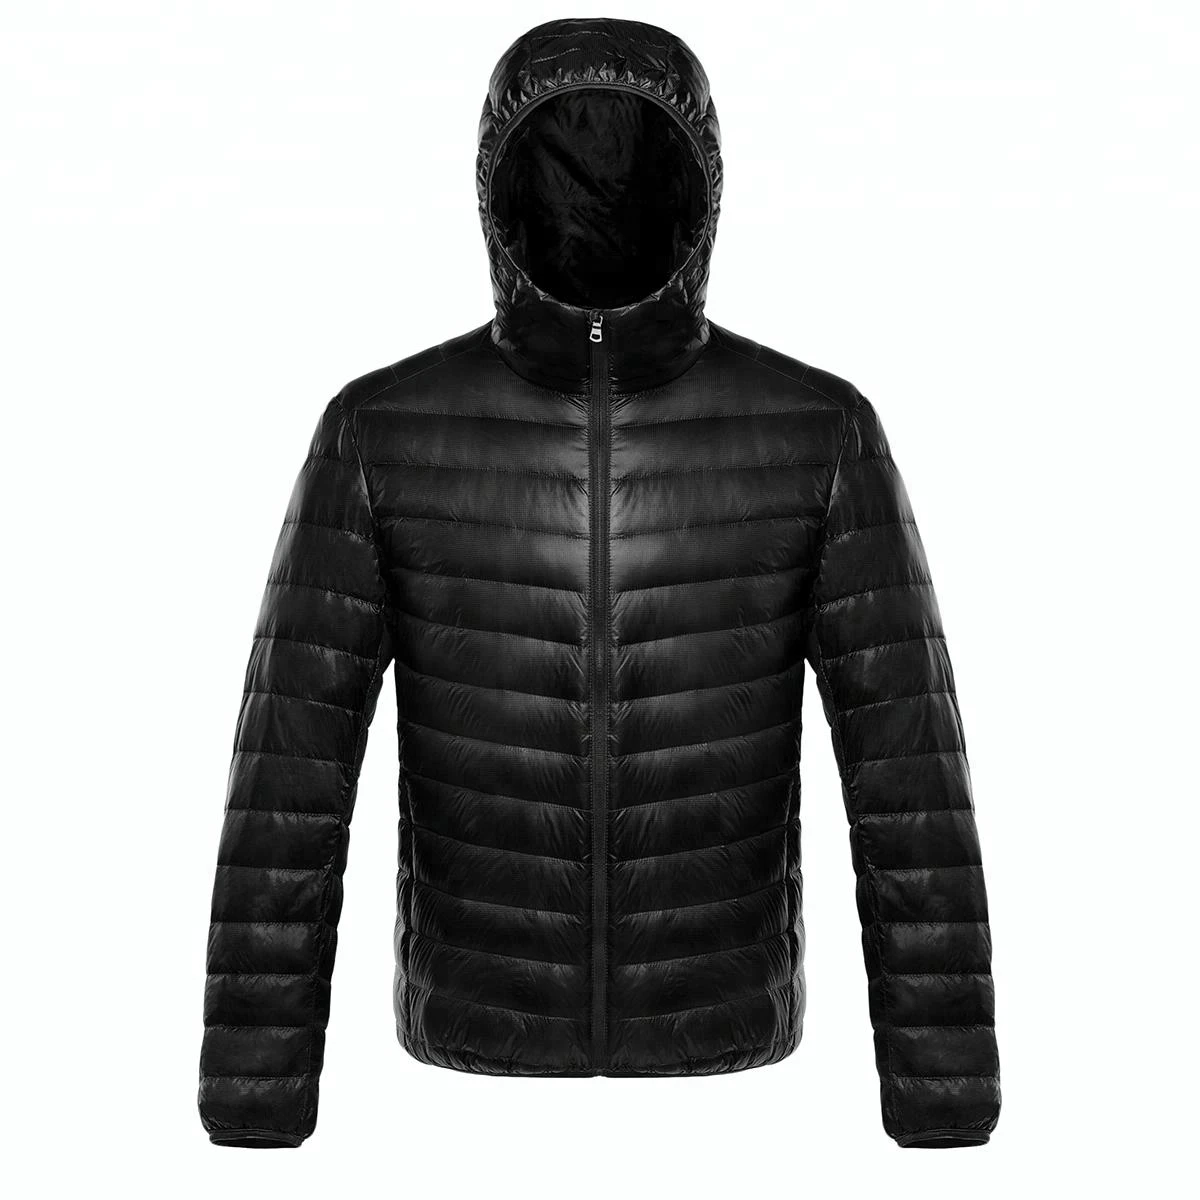 China Factory Mens Down Jacket Hooded Fancy Jacket white duck down jacket